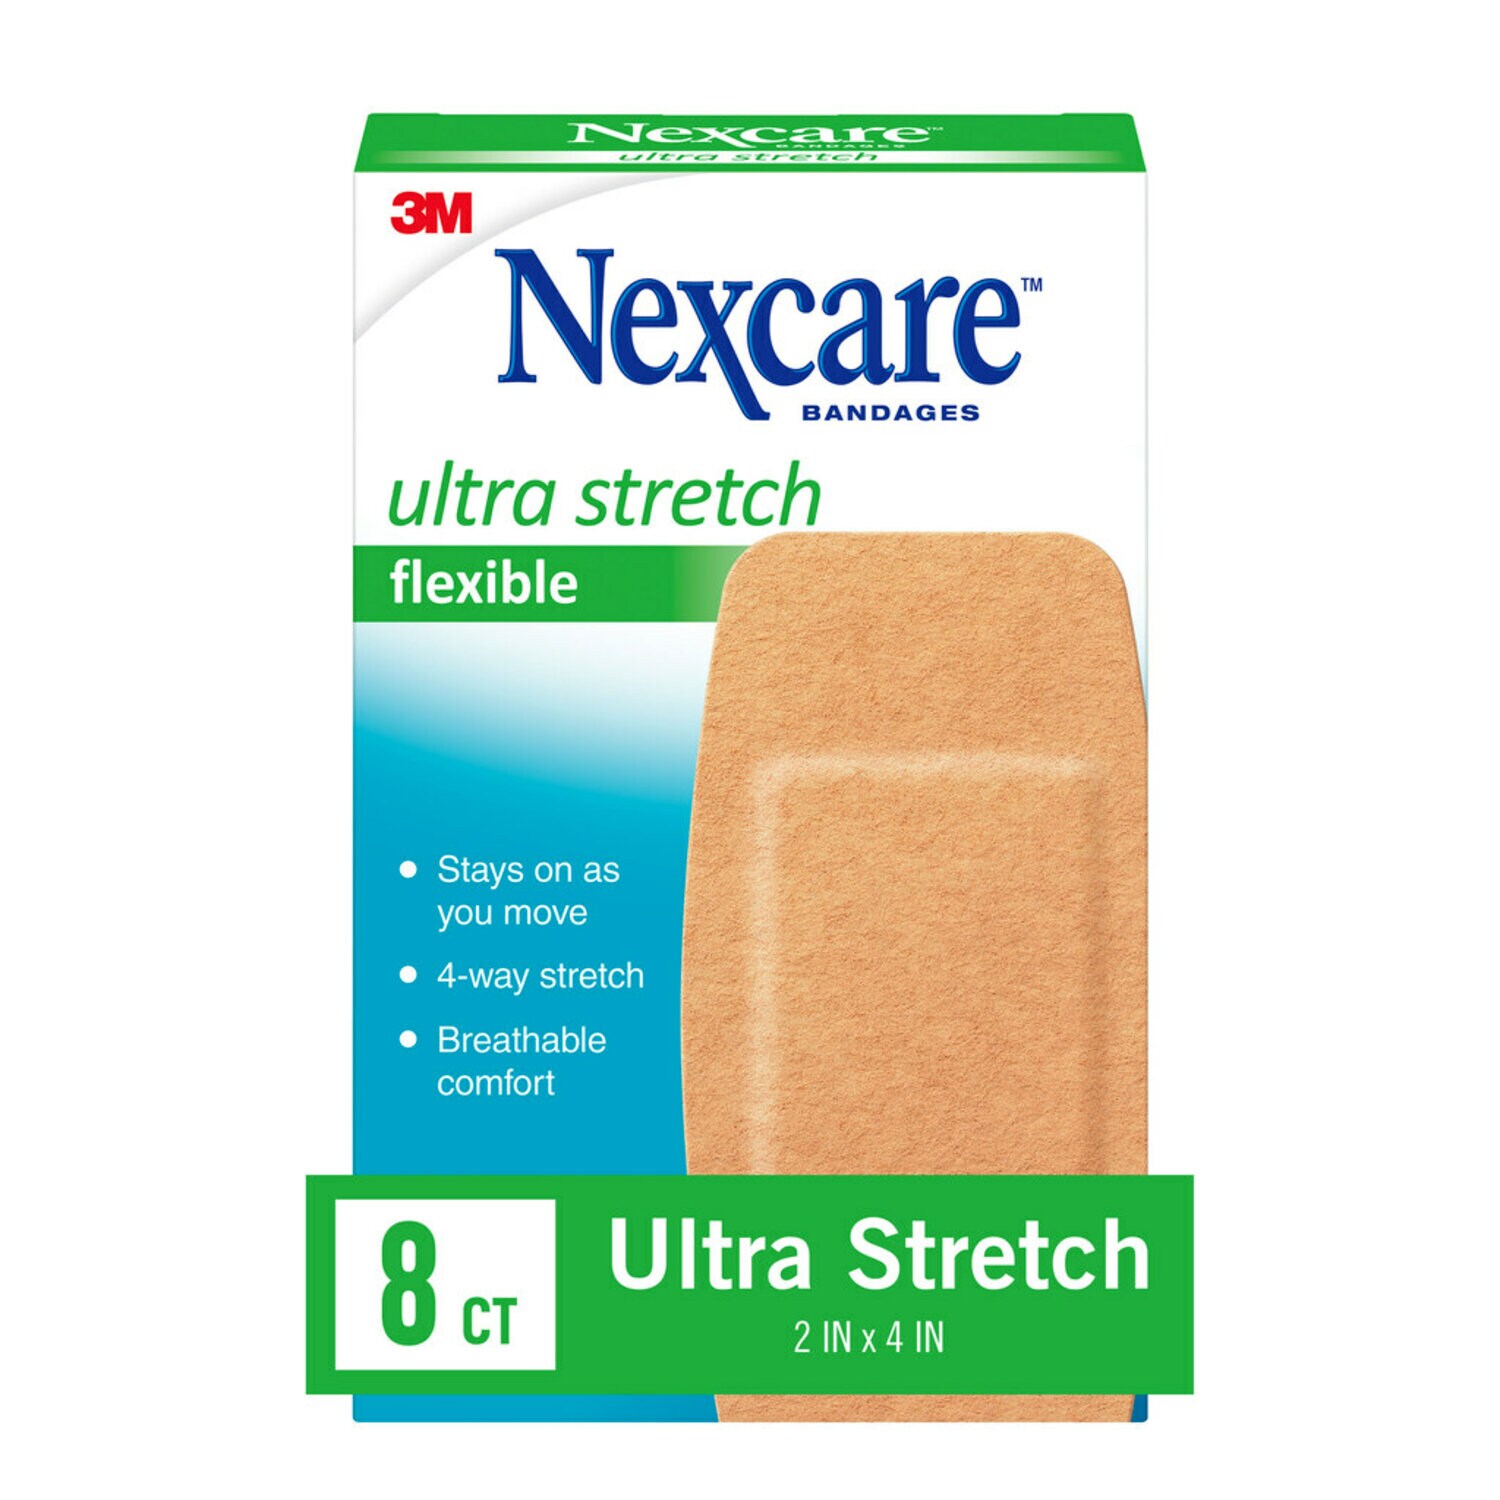 7100195691 - Nexcare Ultra Stretch Bandages 571-08, 2 in x 4 in (50 mm x 101 mm)